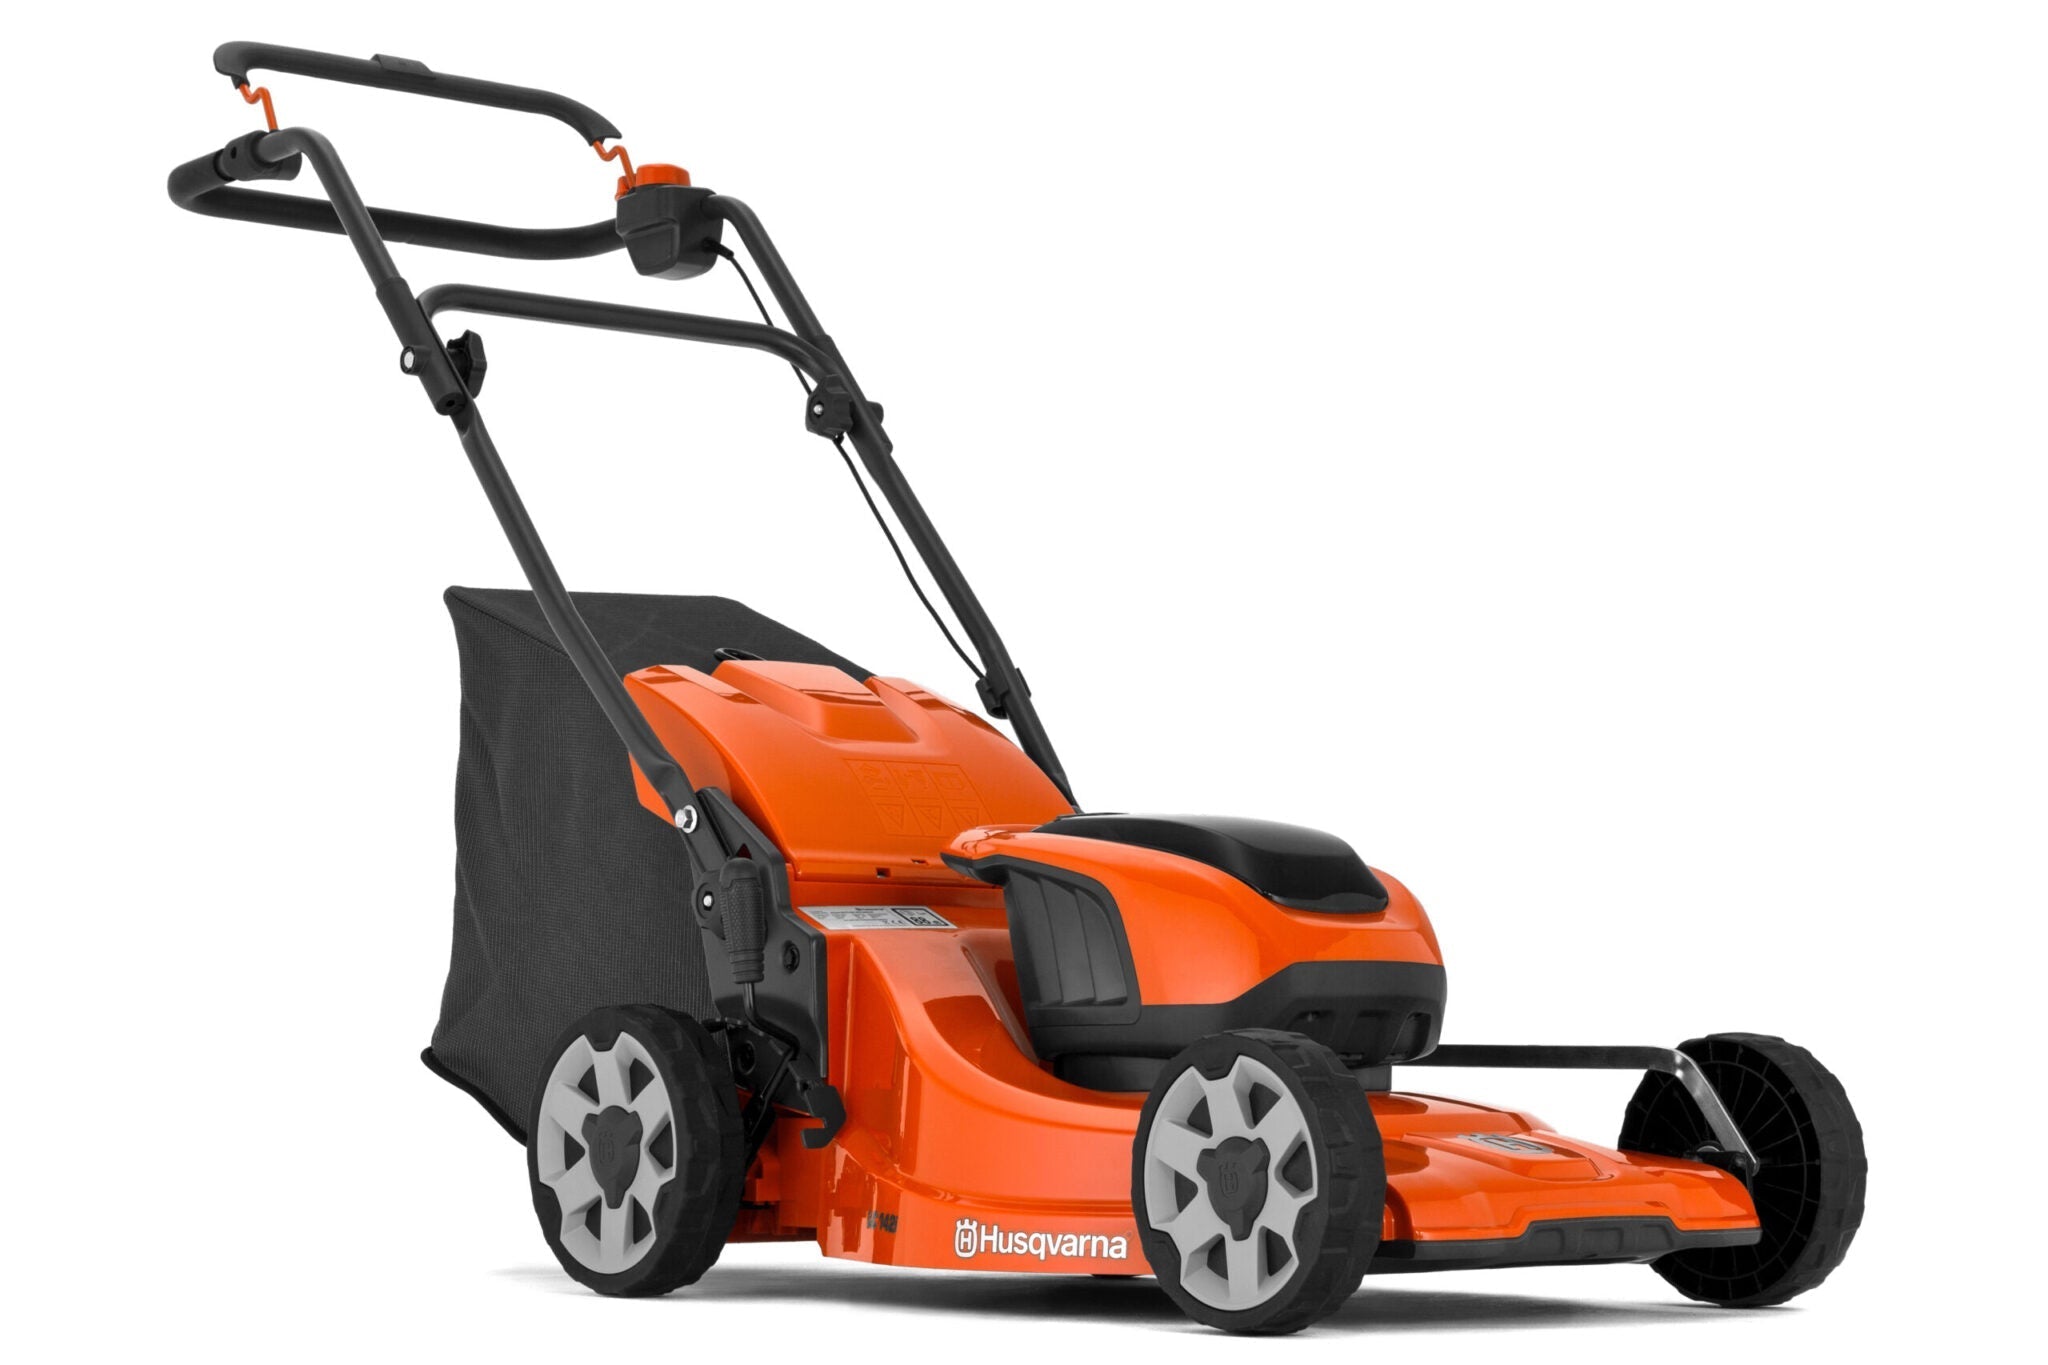 Husqvarna Lawn Mower LB 144i with Battery and Charger